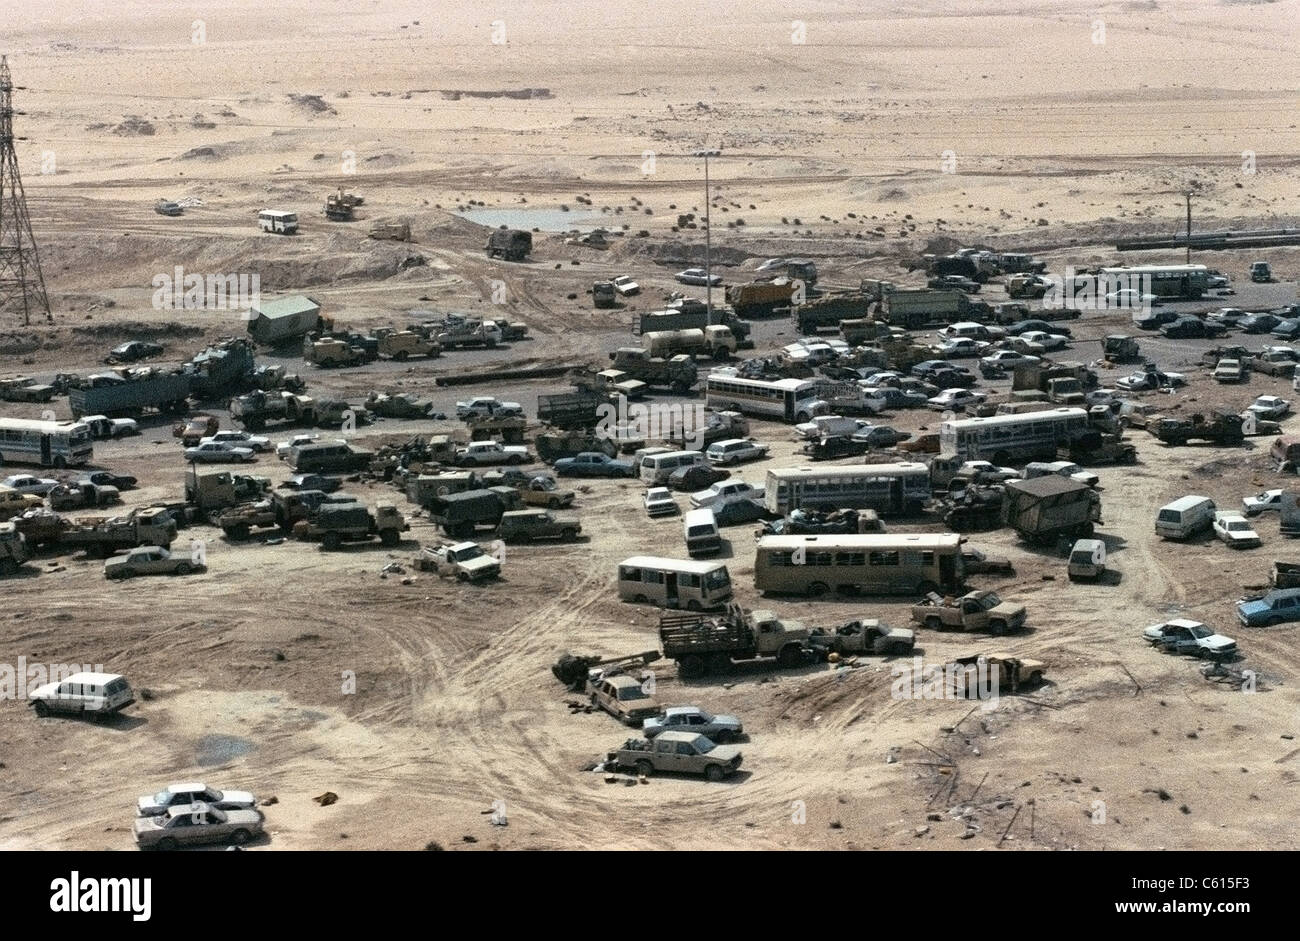 Iraqi Vehicles damaged and abandoned along Highway 80 west of Kuwait City during Operation Desert Storm. Mar. 1 1991. (BSLOC 2011 12 11) Stock Photo